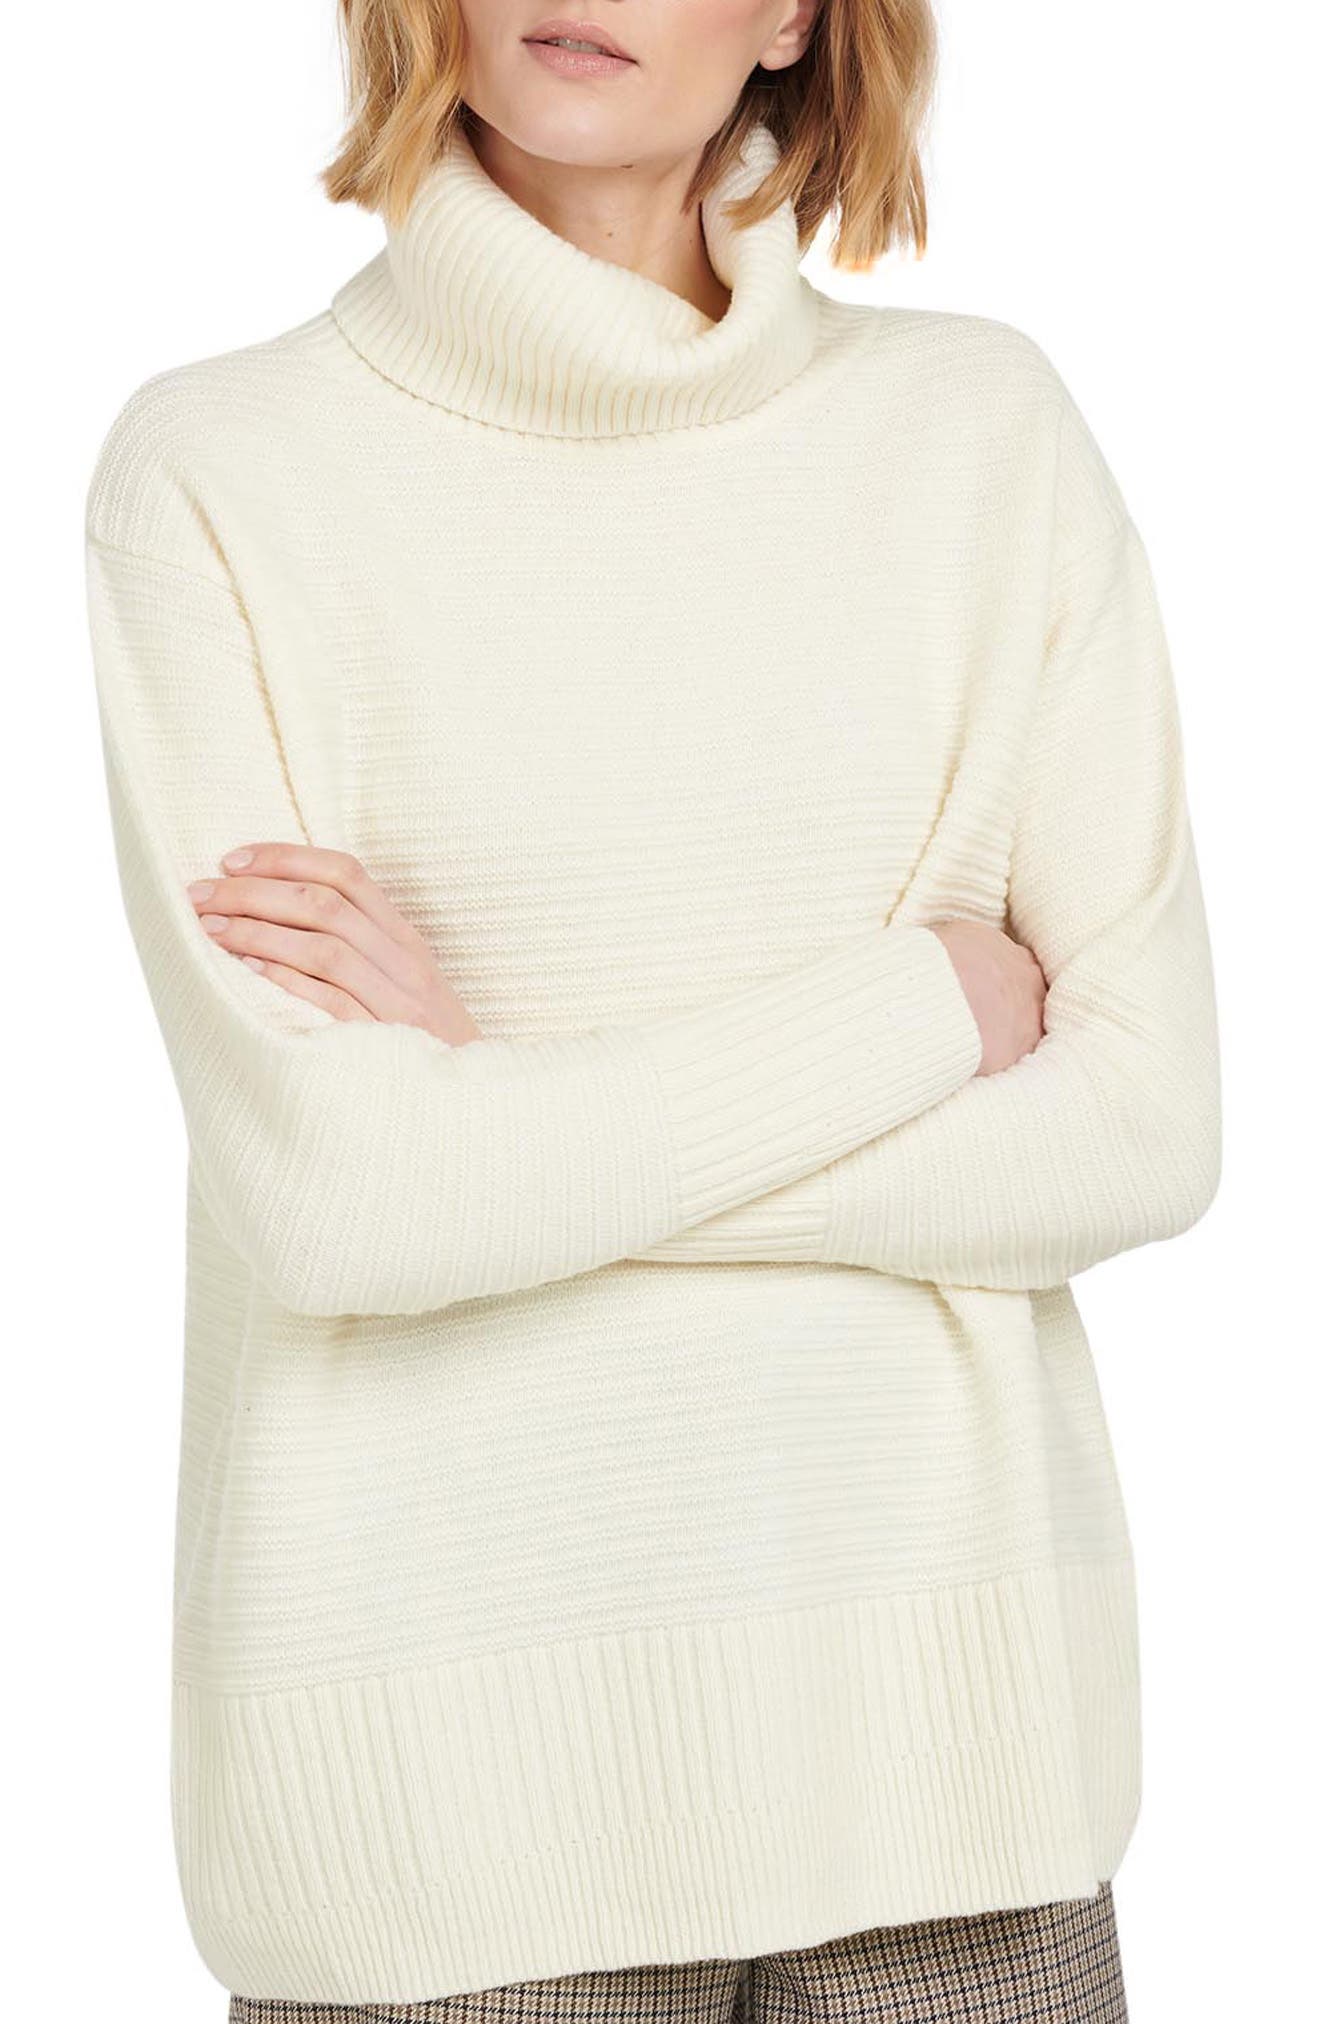 Barbour Rosehall Wool Blend Ribbed Turtleneck Sweater in Whisper at Nordstrom